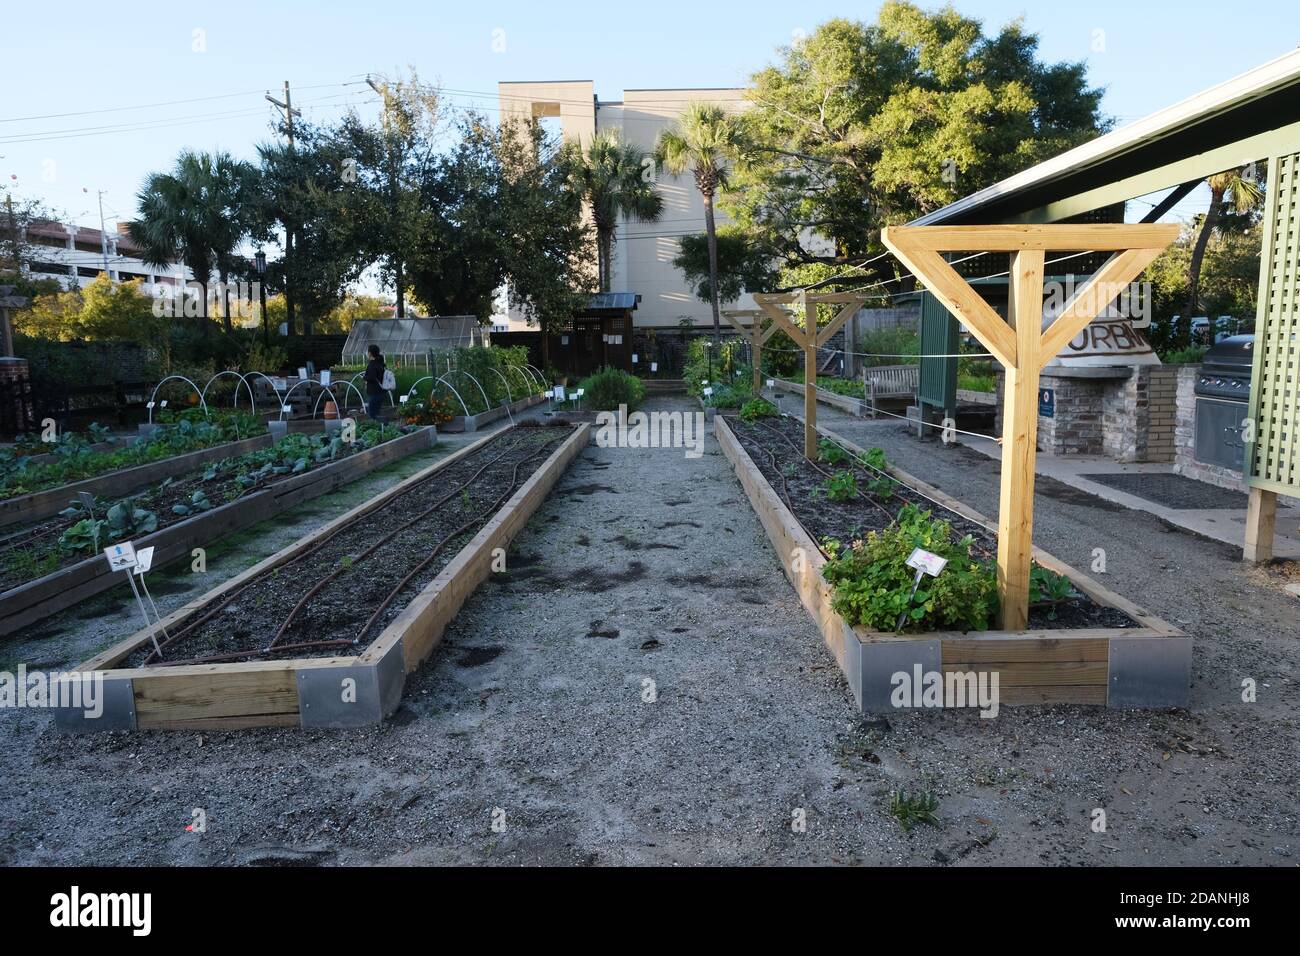 Urban Garden, Cabbage, Kale, New Plants, Small Pots, Painted Rocks, Glass House, Red Cart, Copper Pipes,Tool, Shed,Vegetable Puns Stock Photo